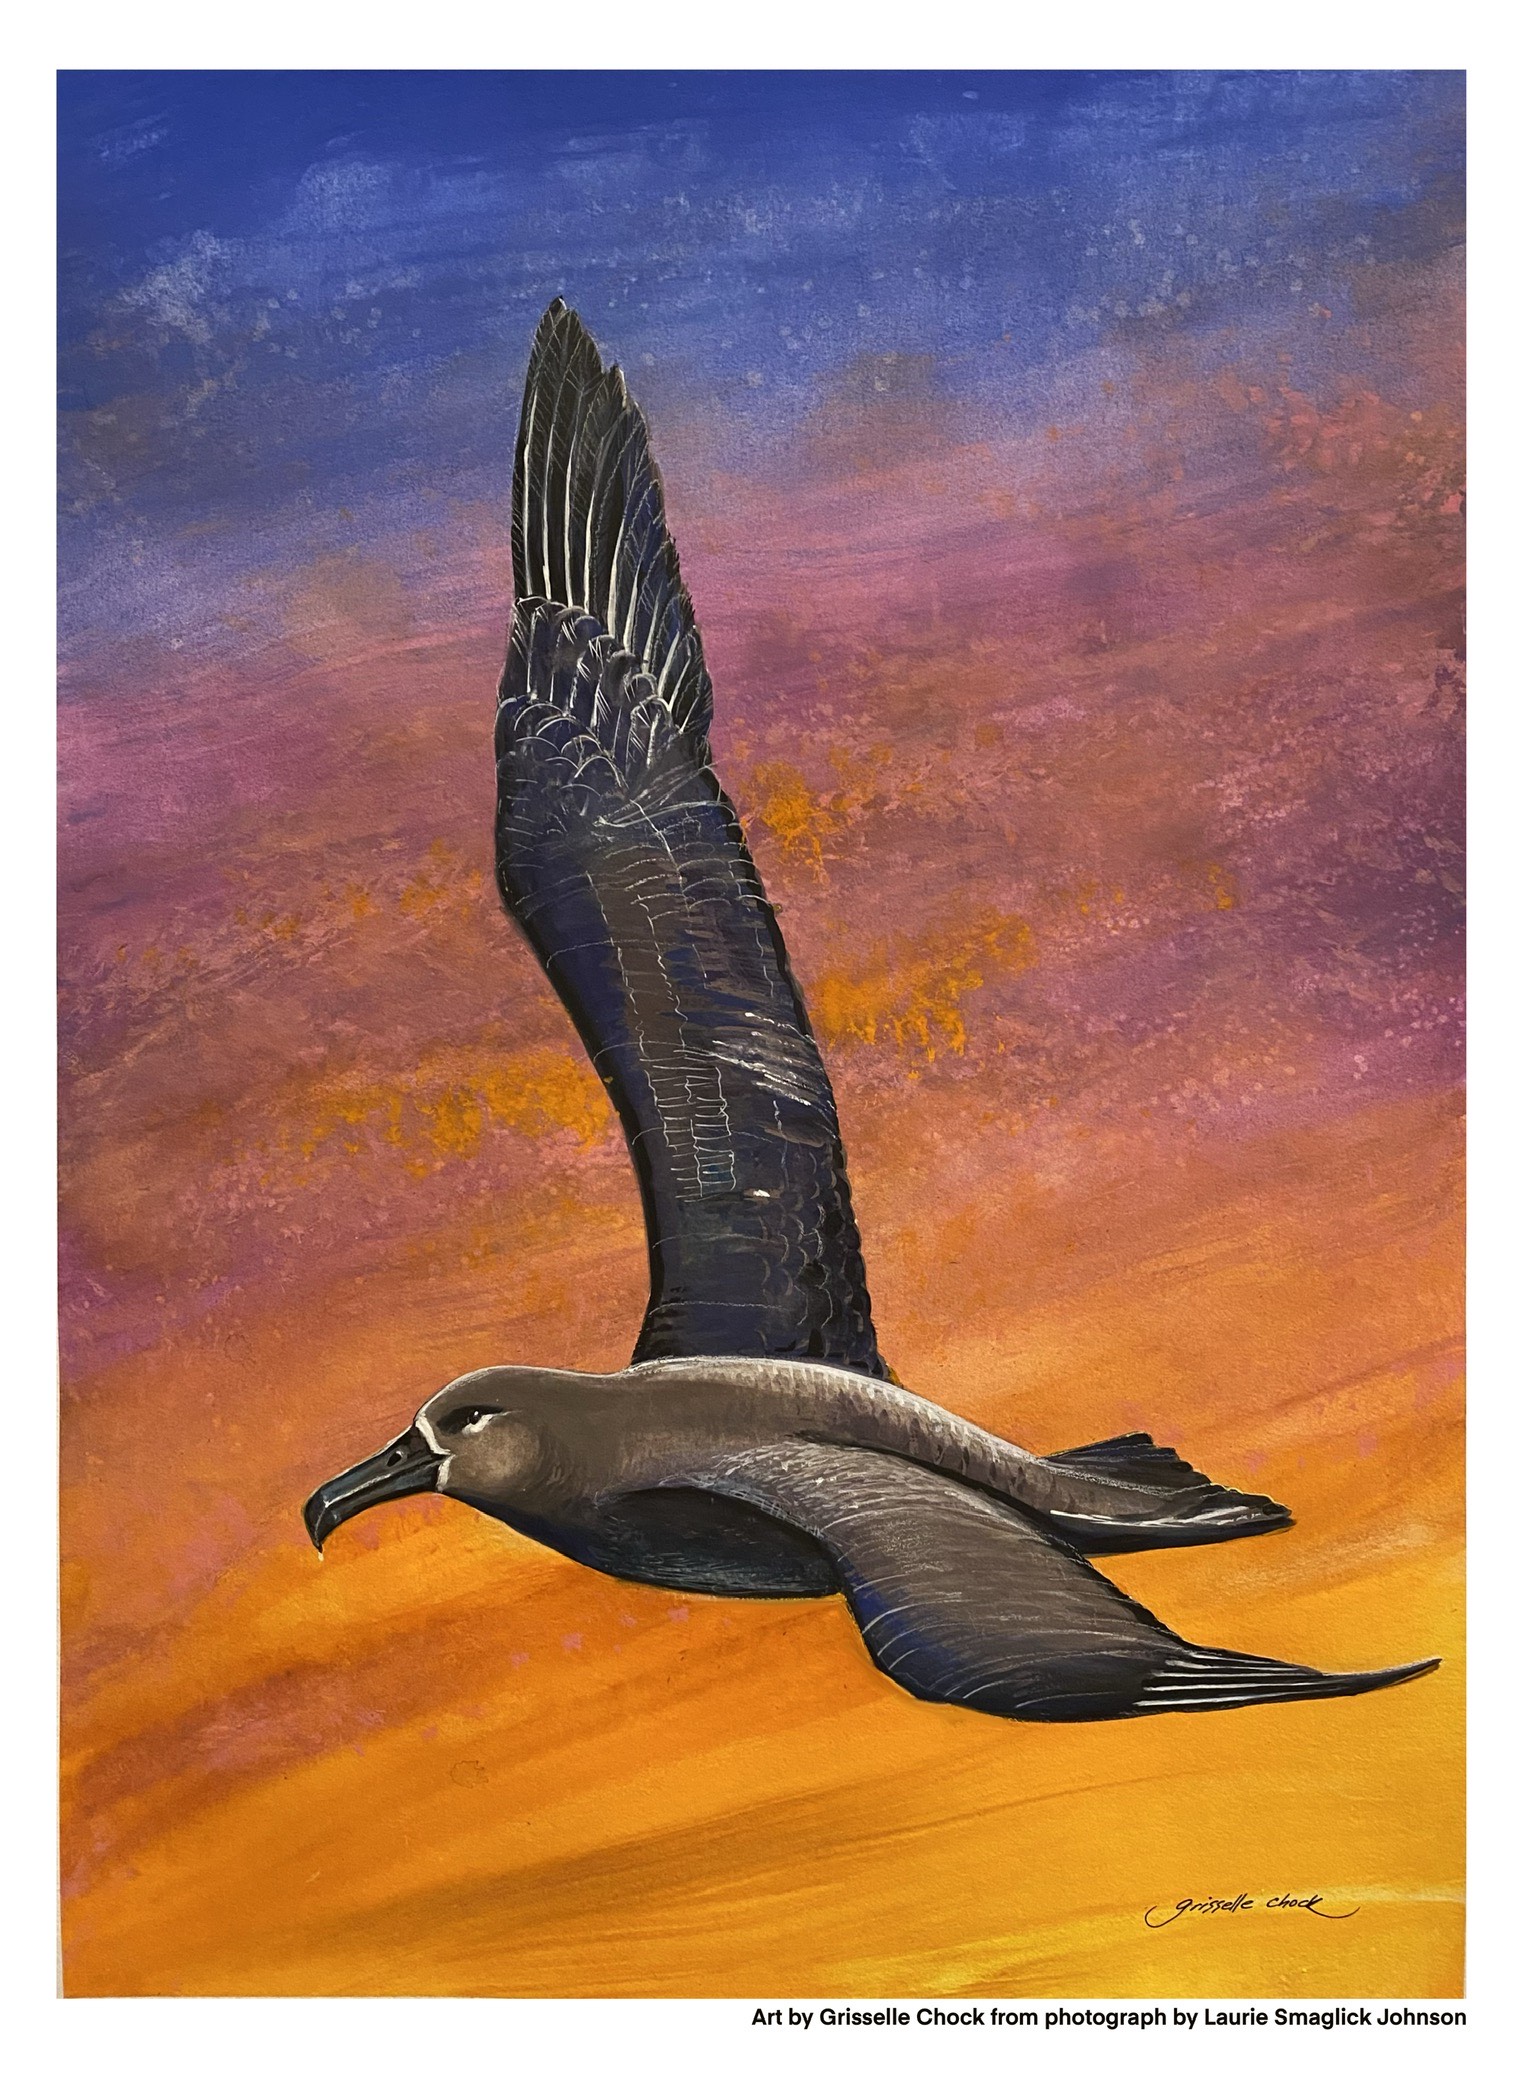 Grisselle Chock Albatross at sunset Black footed Albatross gouache Laurie Smaglick Johnson 